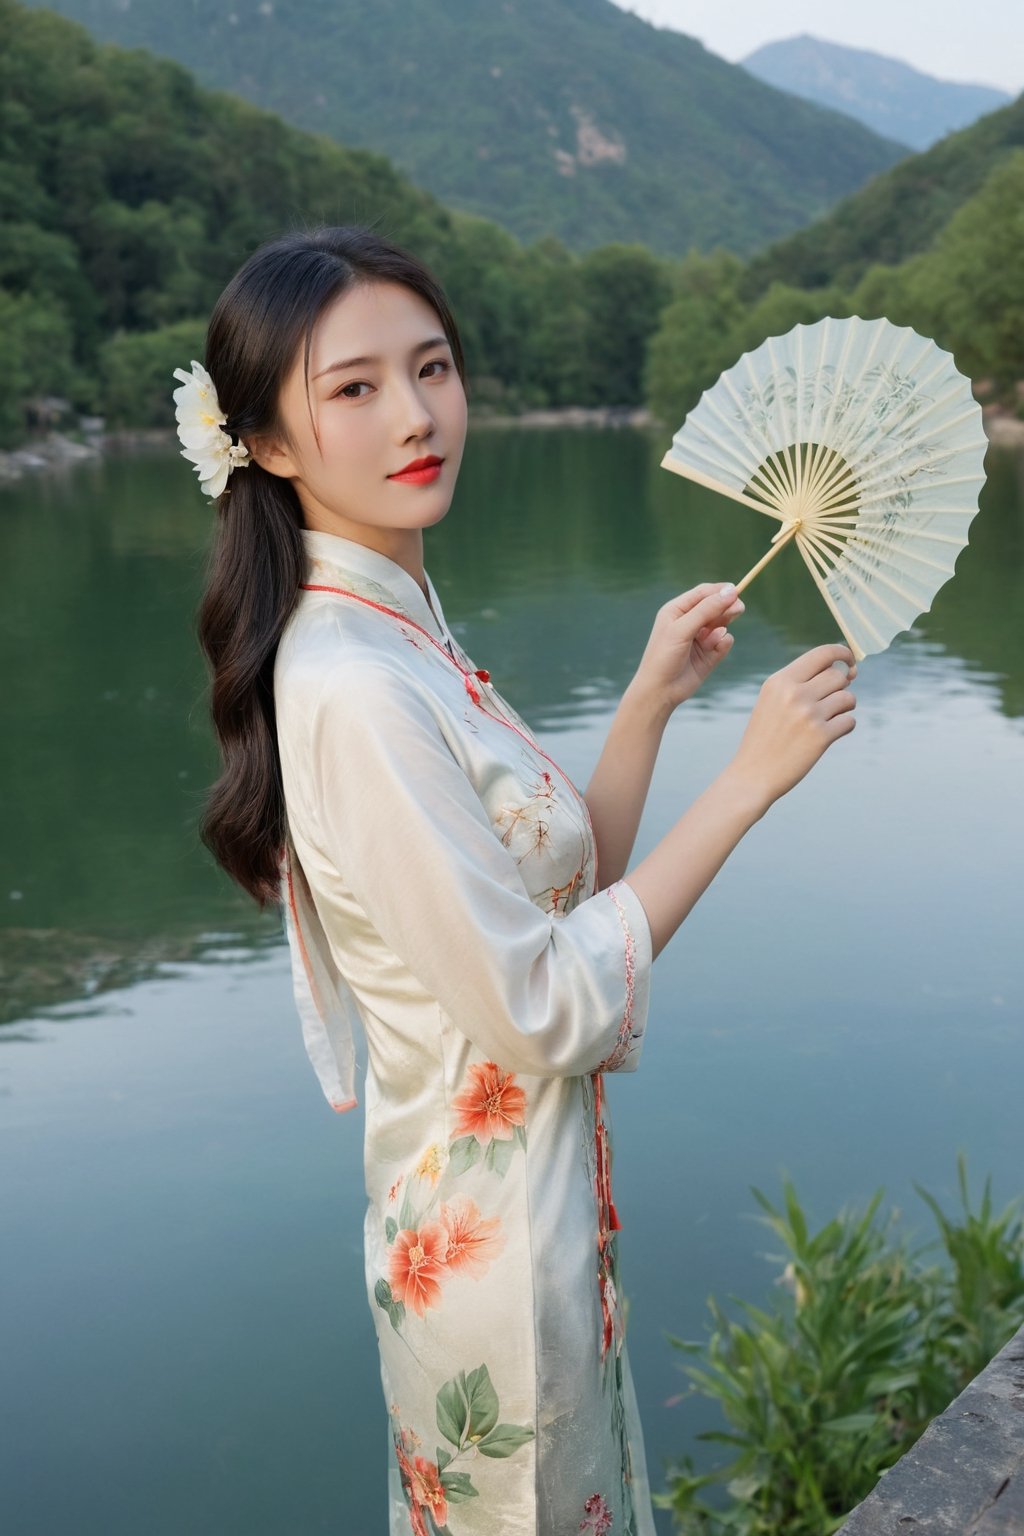 (ultra realistic,best quality),photorealistic,Extremely Realistic, in depth, cinematic light,hubggirl,

Beautiful young Chinese woman, long wavy black hair, wearing a chic summer cheongsam with modern floral patterns, standing by a serene lake. She is holding a traditional Chinese paper fan, with a gentle smile on her face. The scene is set during golden hour, with the sun casting a soft, warm light, enhancing the vibrant colors of the flowers and the reflective water surface, capturing a tranquil and elegant summer evening.

dynamic poses, particle effects, perfect hands, perfect lighting, vibrant colors, intricate details, high detailed skin, intricate background, realism, raw, analog, taken by Sony Alpha 7R IV, Zeiss Otus 85mm F1.4, ISO 100 Shutter Speed 1/400,
